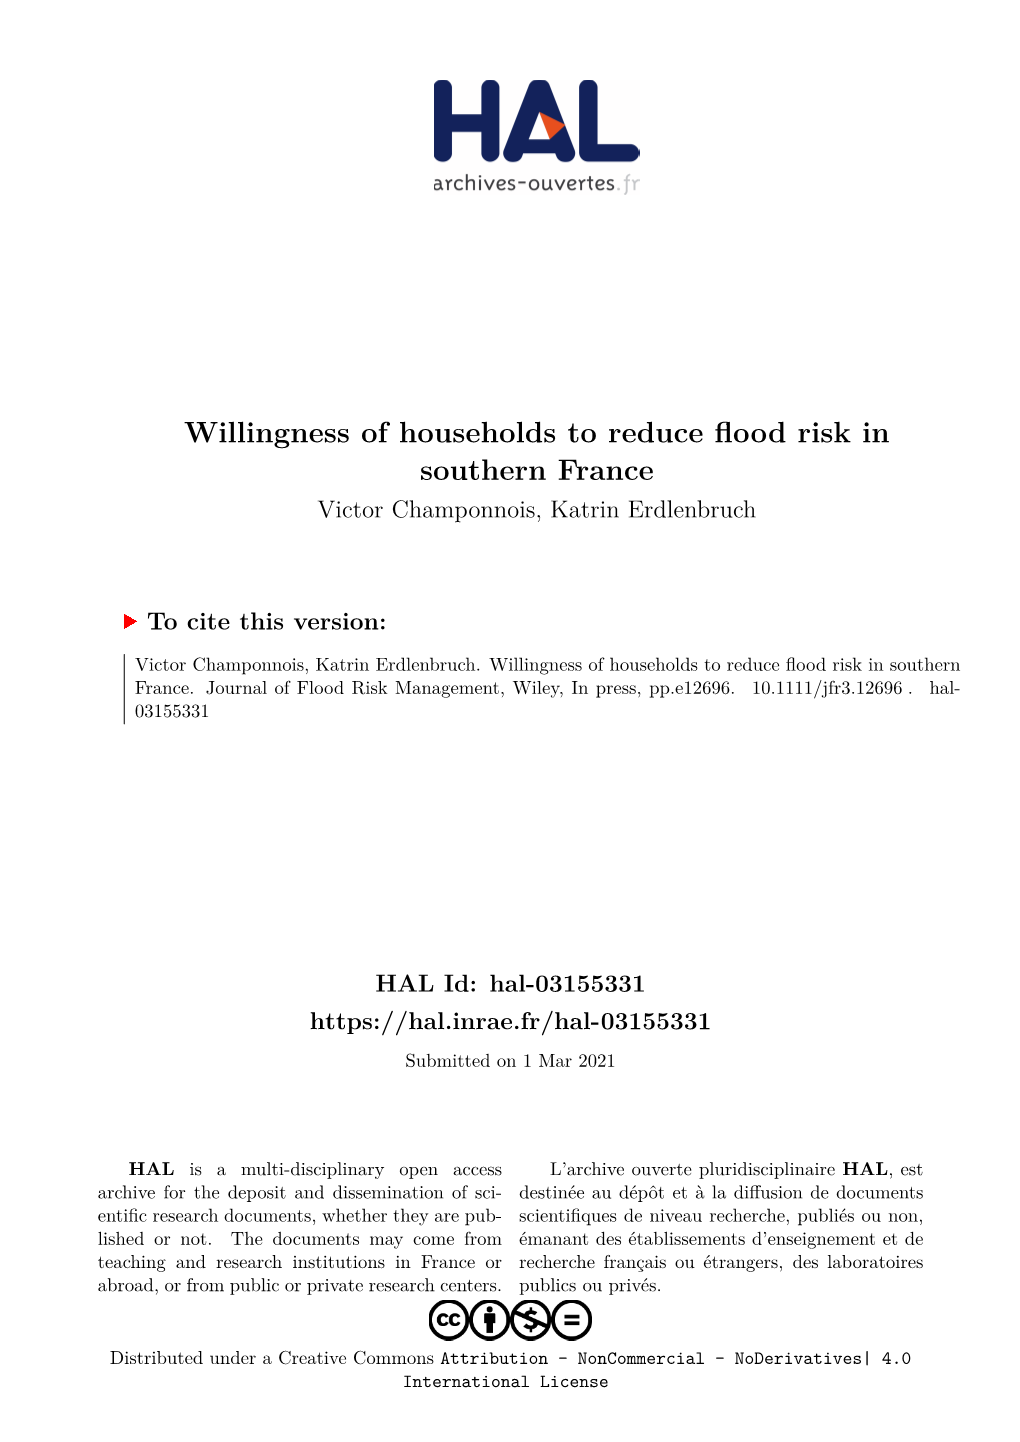 Willingness of Households to Reduce Flood Risk in Southern France Victor Champonnois, Katrin Erdlenbruch